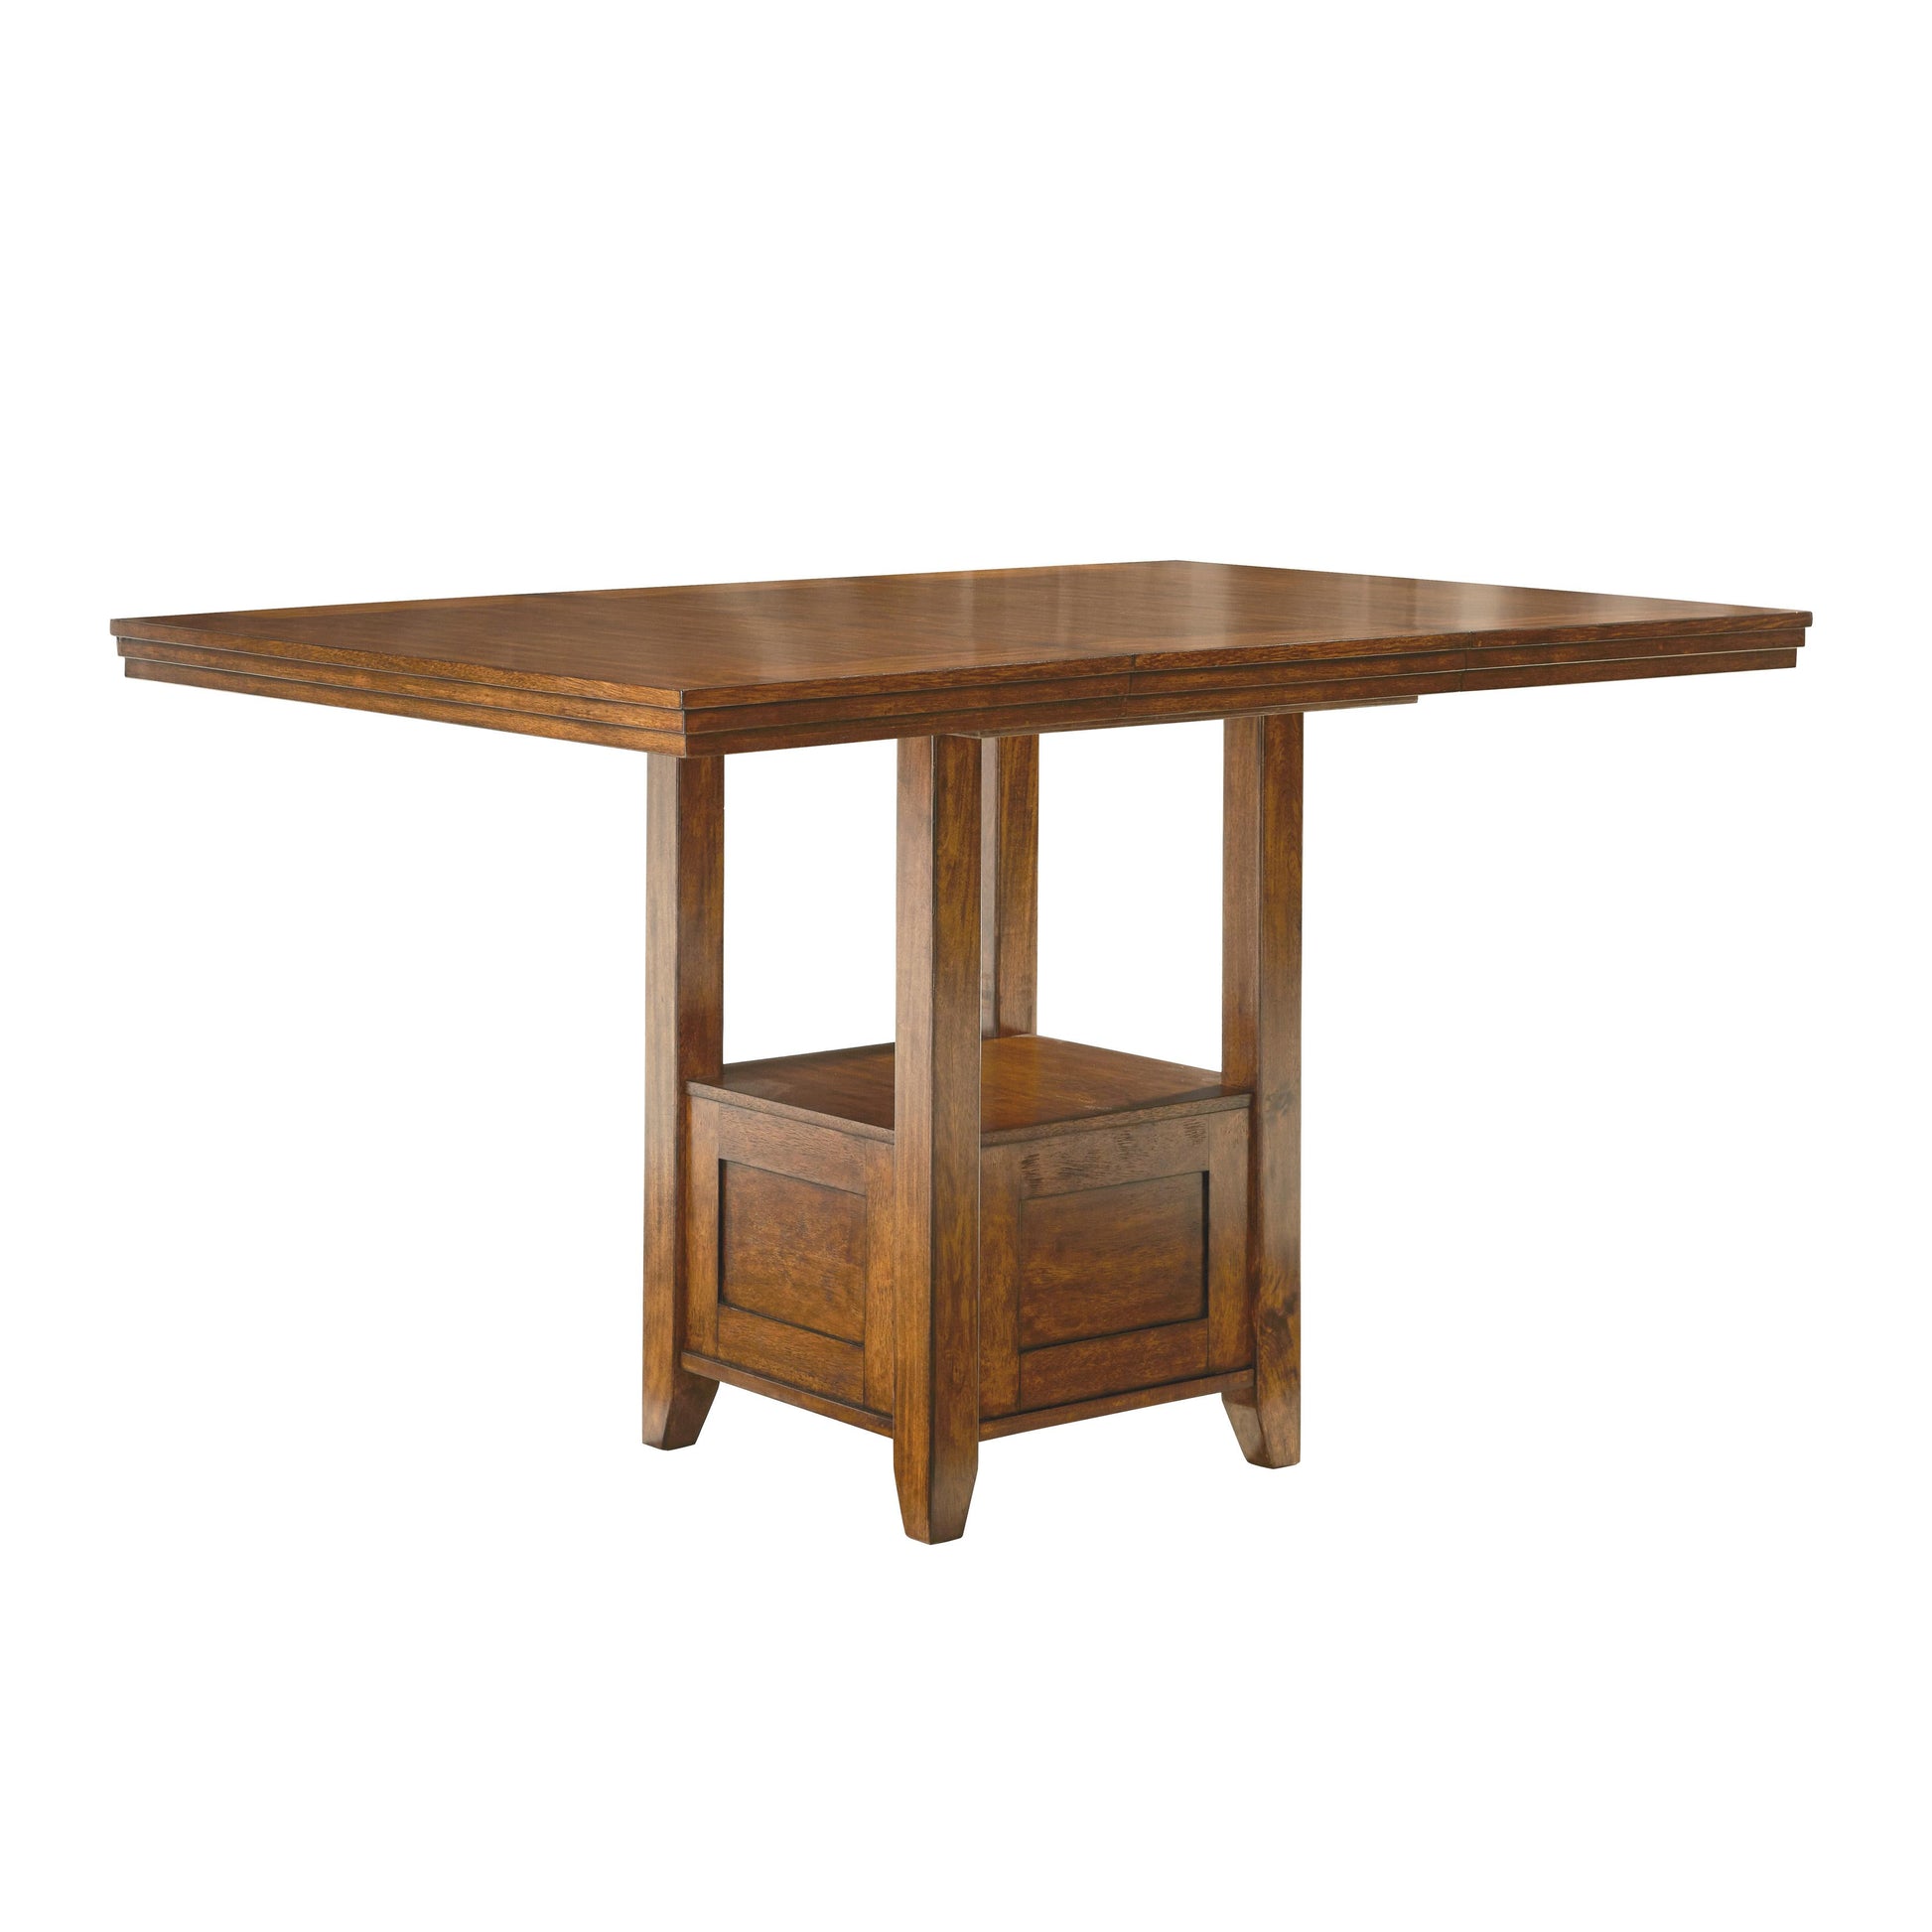 Signature Design by Ashley Ralene Counter Height Dining Table with Pedestal Base D594-42